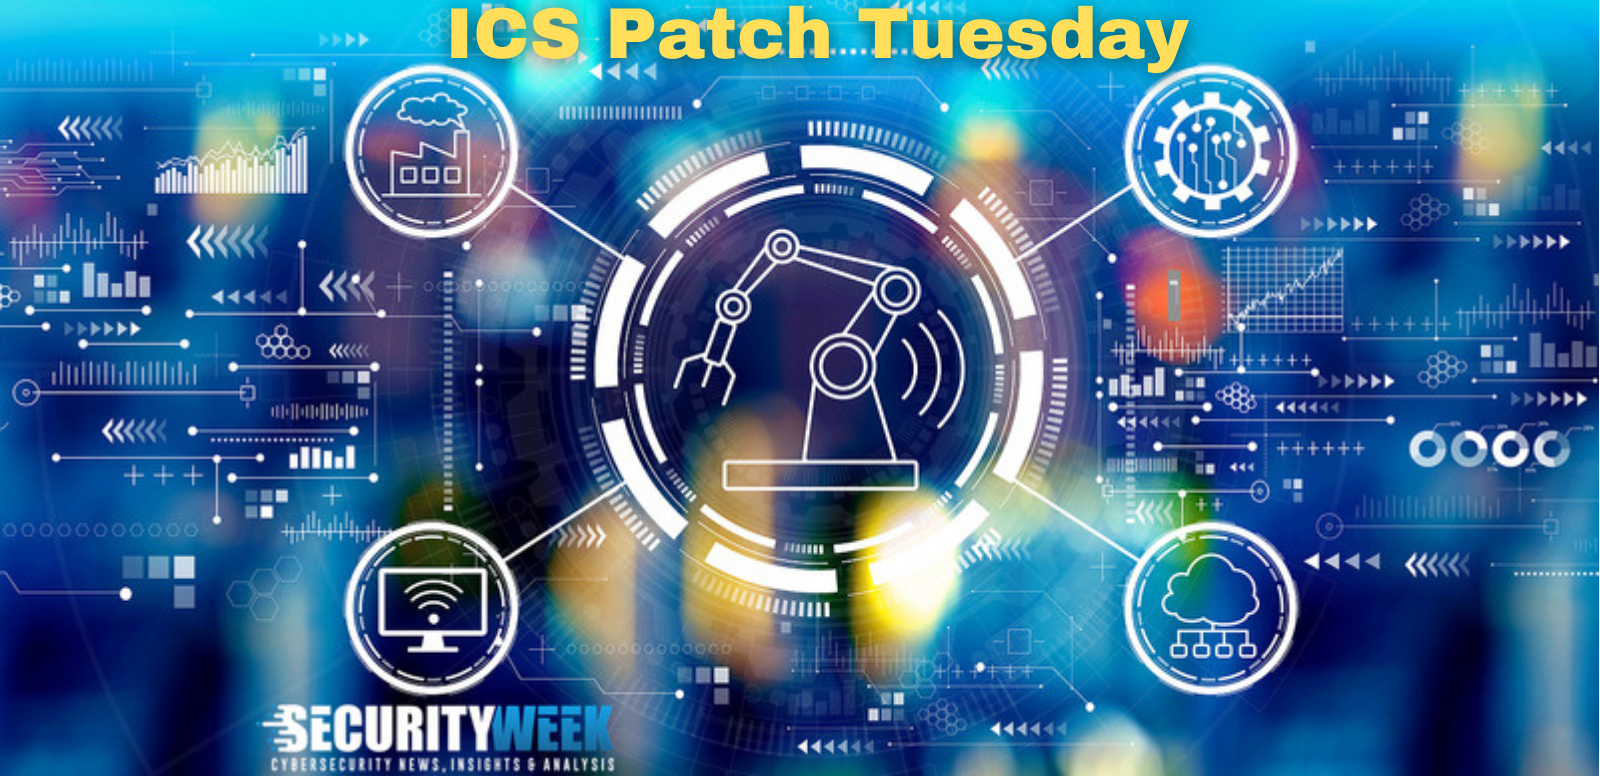 ICS Patch Tuesday: Siemens Fixes 7 Vulnerabilities in Ruggedcom Products – Source: www.securityweek.com